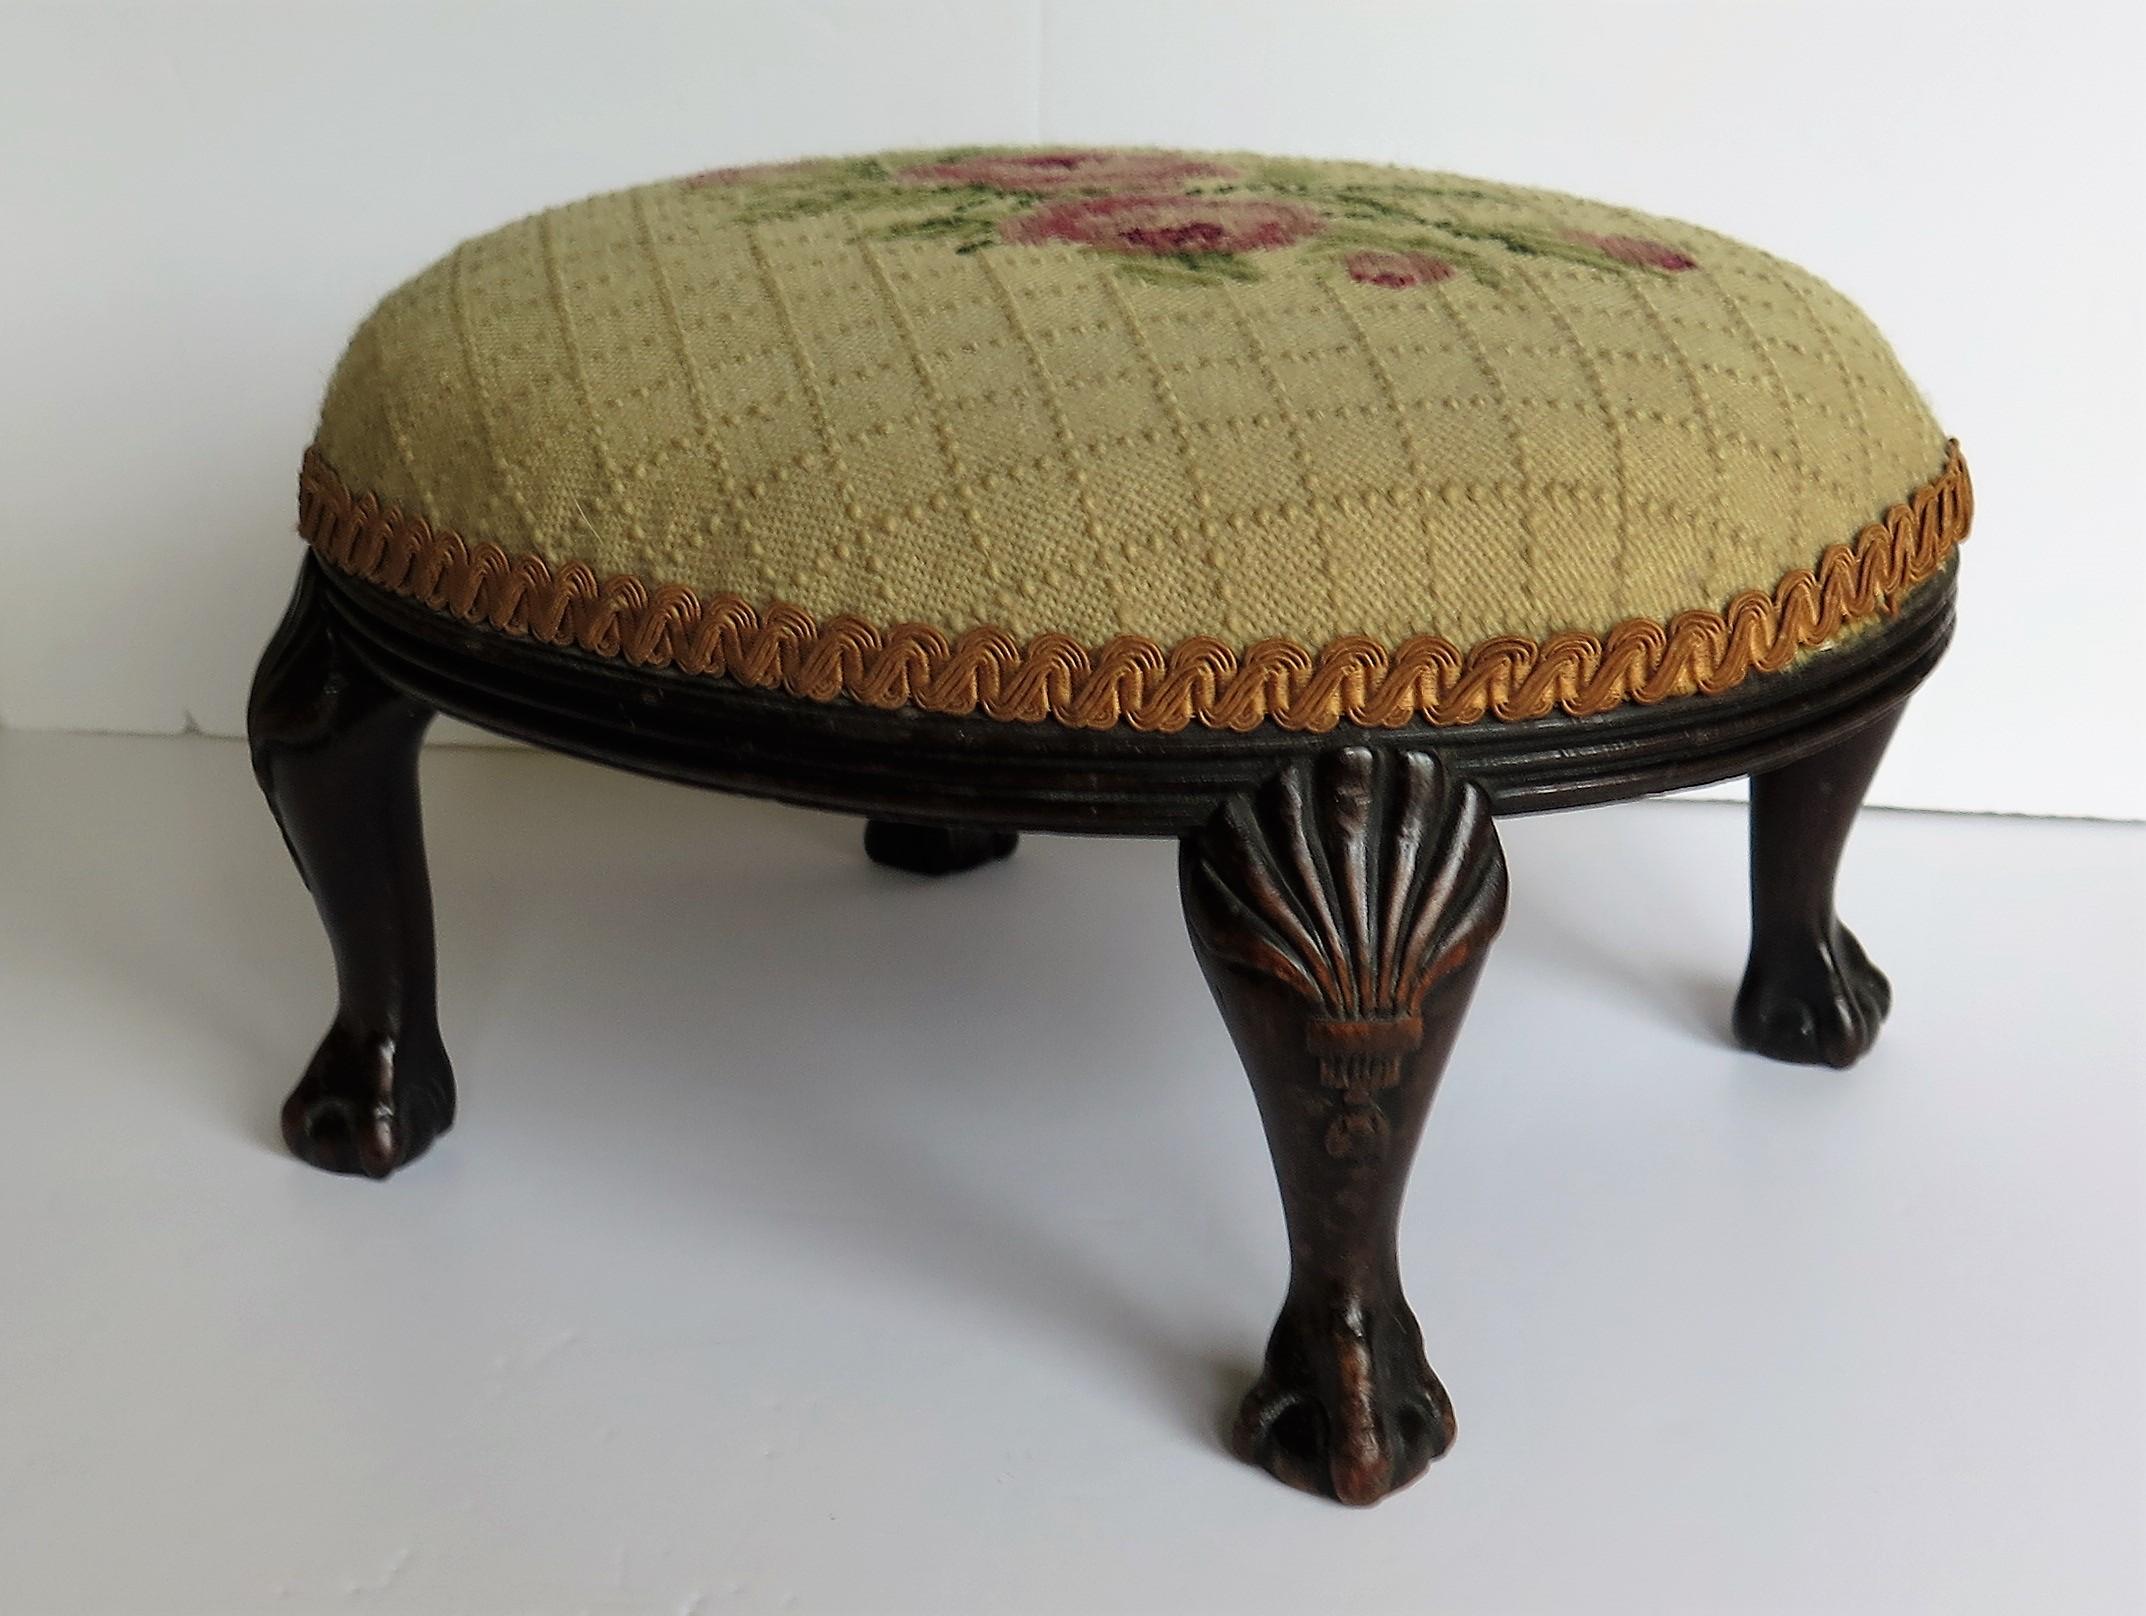 This is a very good quality English walnut oval foot stool on ball and claw feet with a hand embroidered fabric top, from the late Georgian period, circa 1820

The stool is made of walnut with an oval shape on four short legs having crisply hand